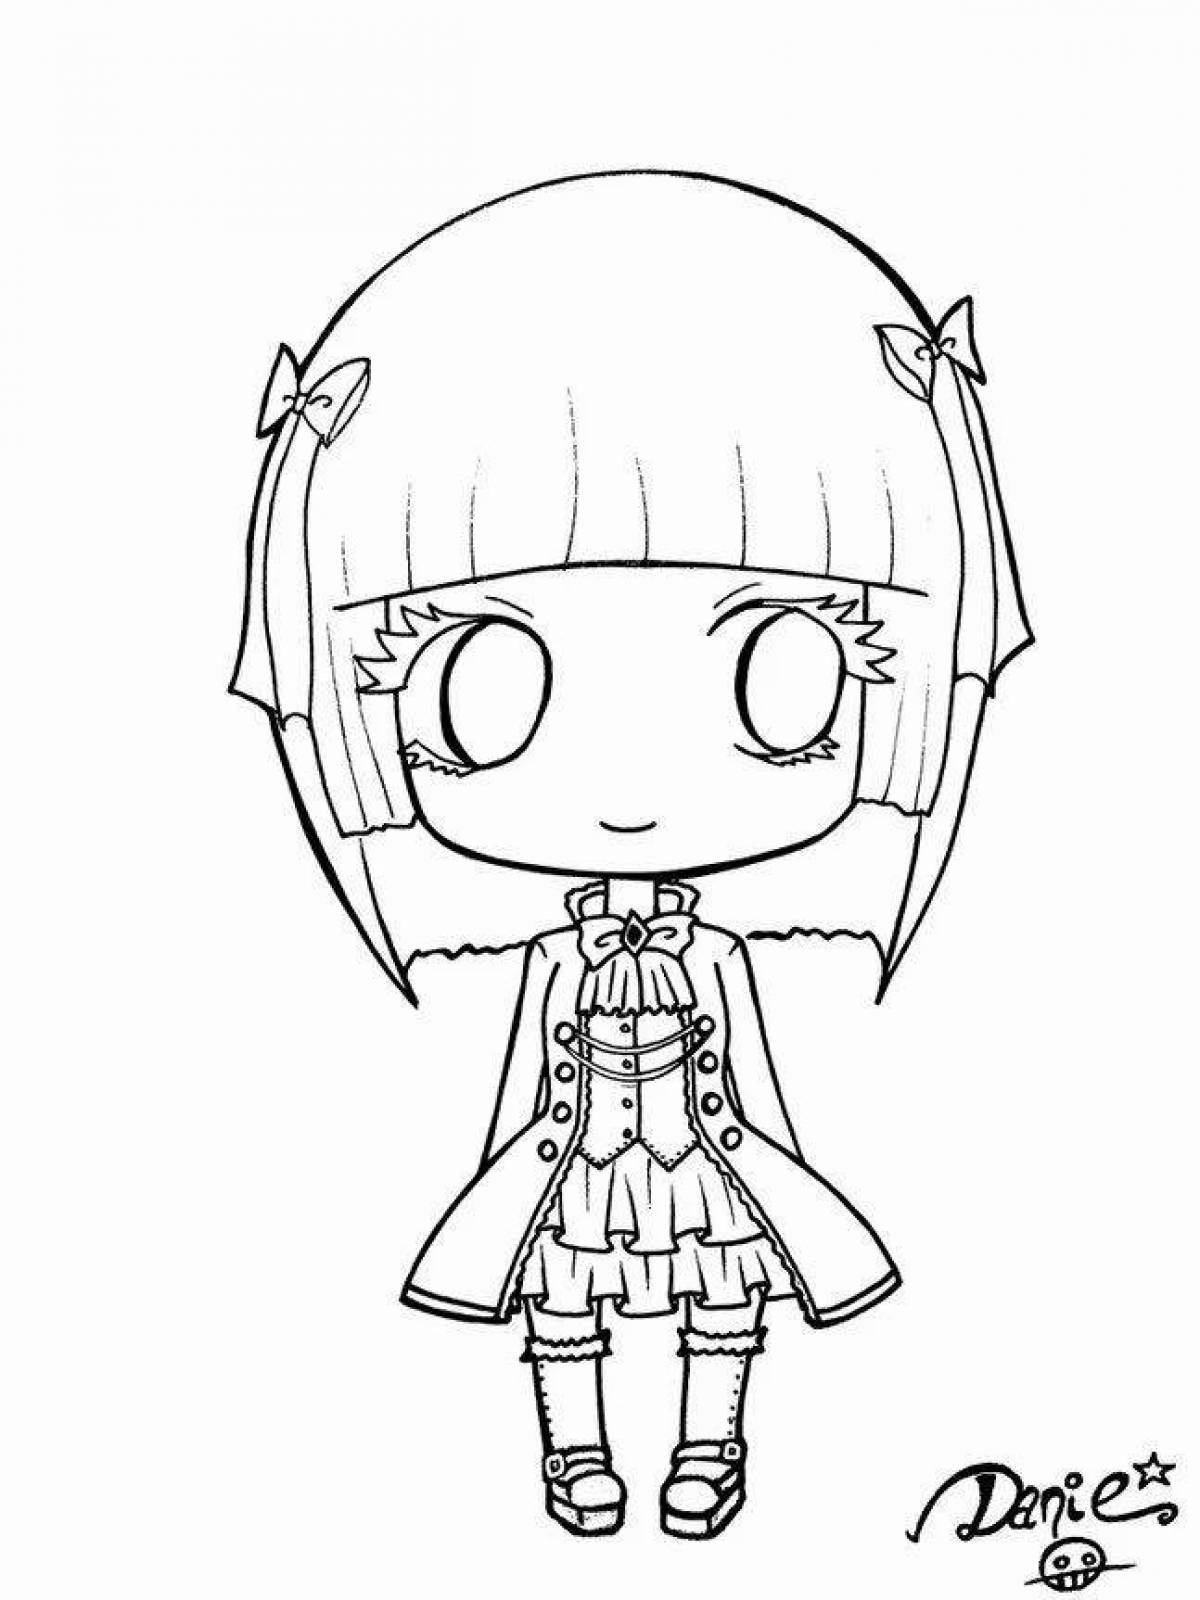 Awesome chibi maker coloring page